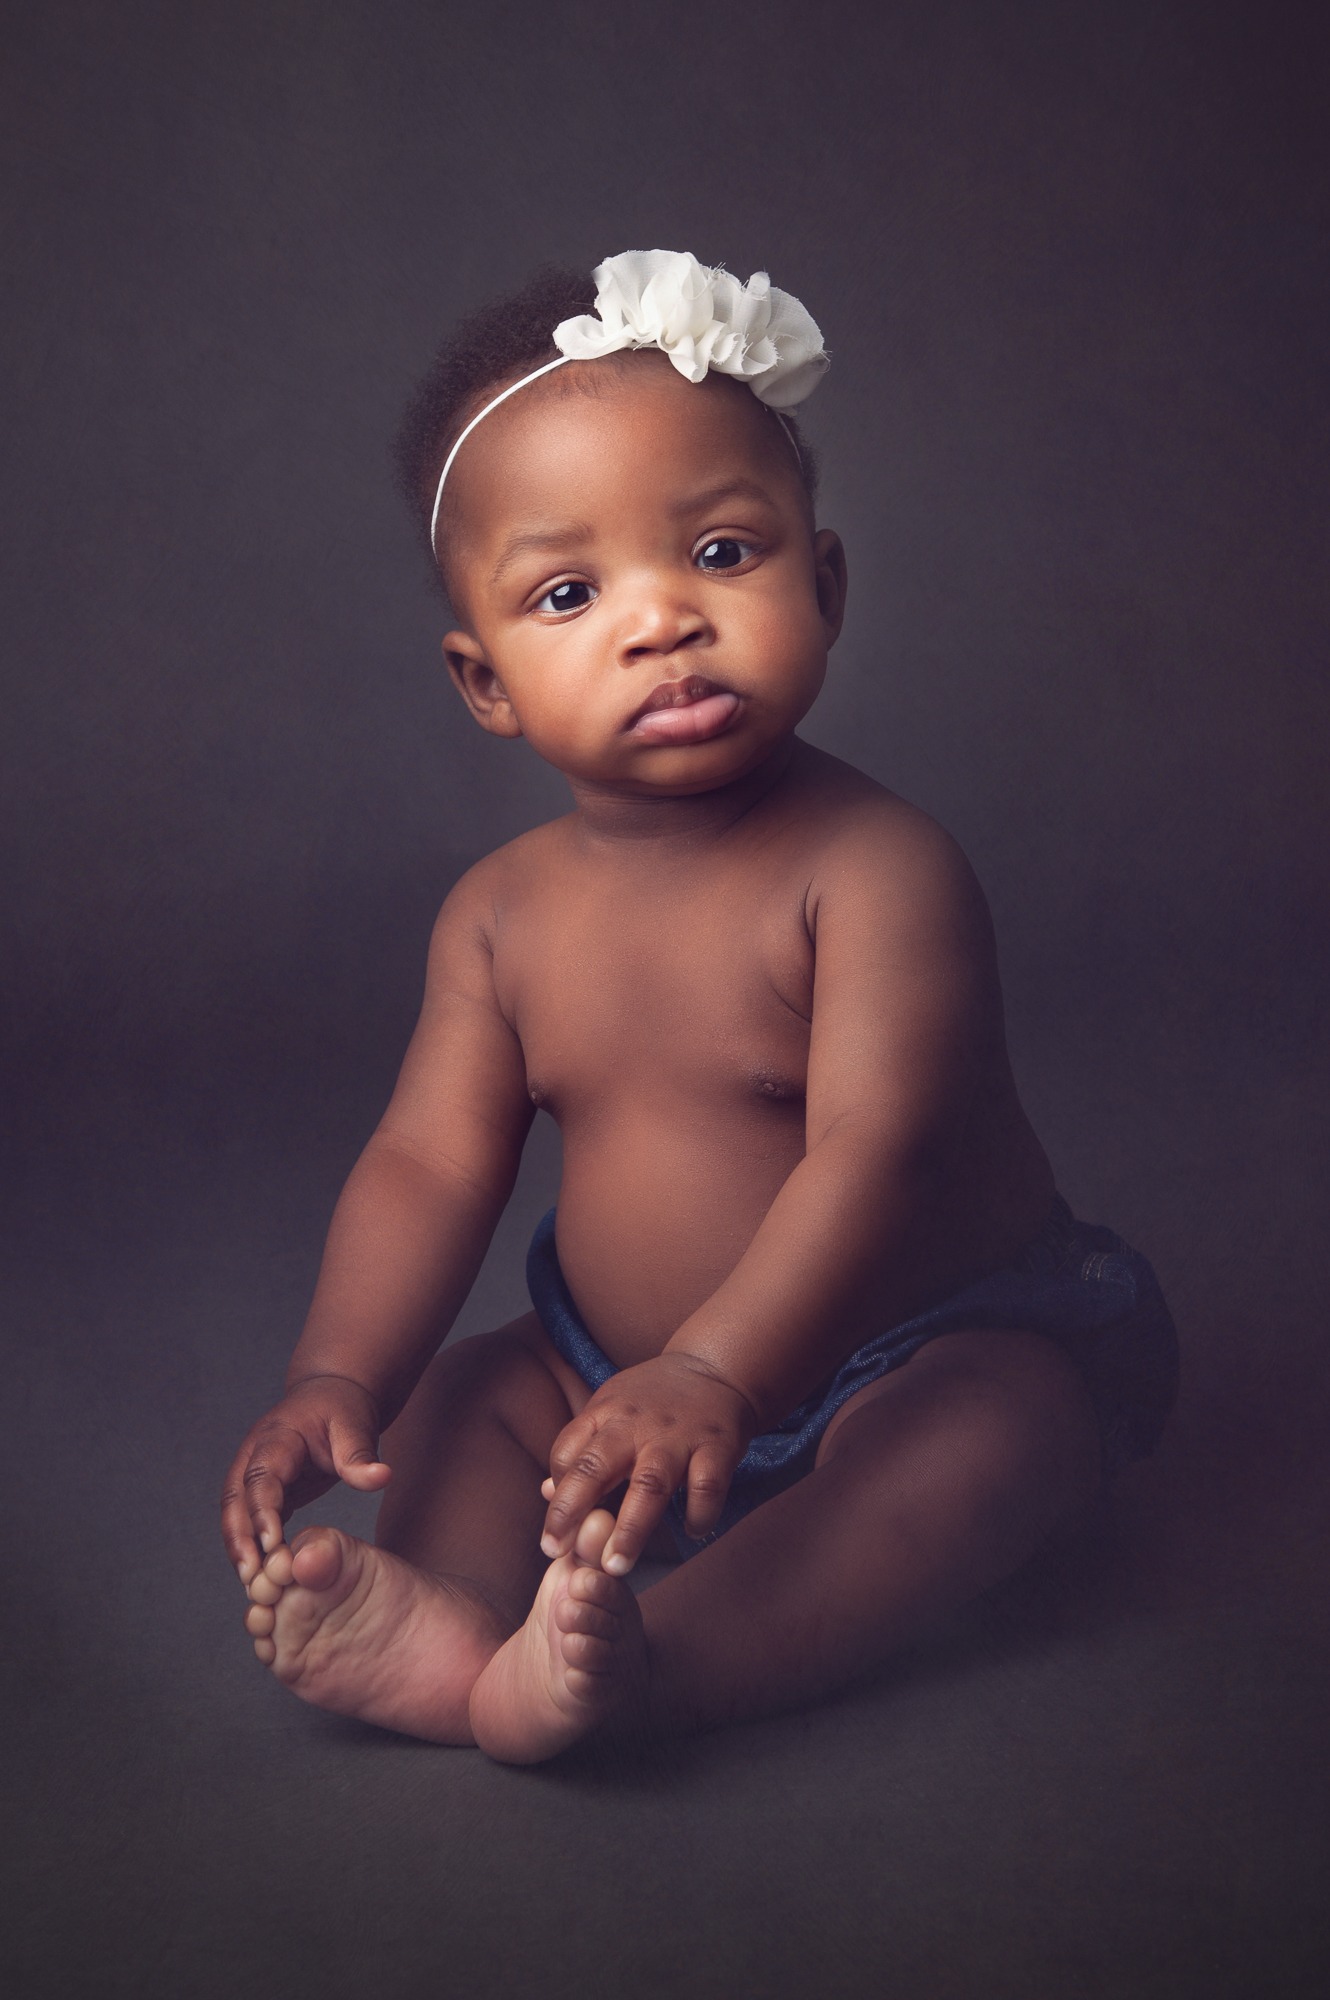 Studio portrait photography session of a curios baby girl